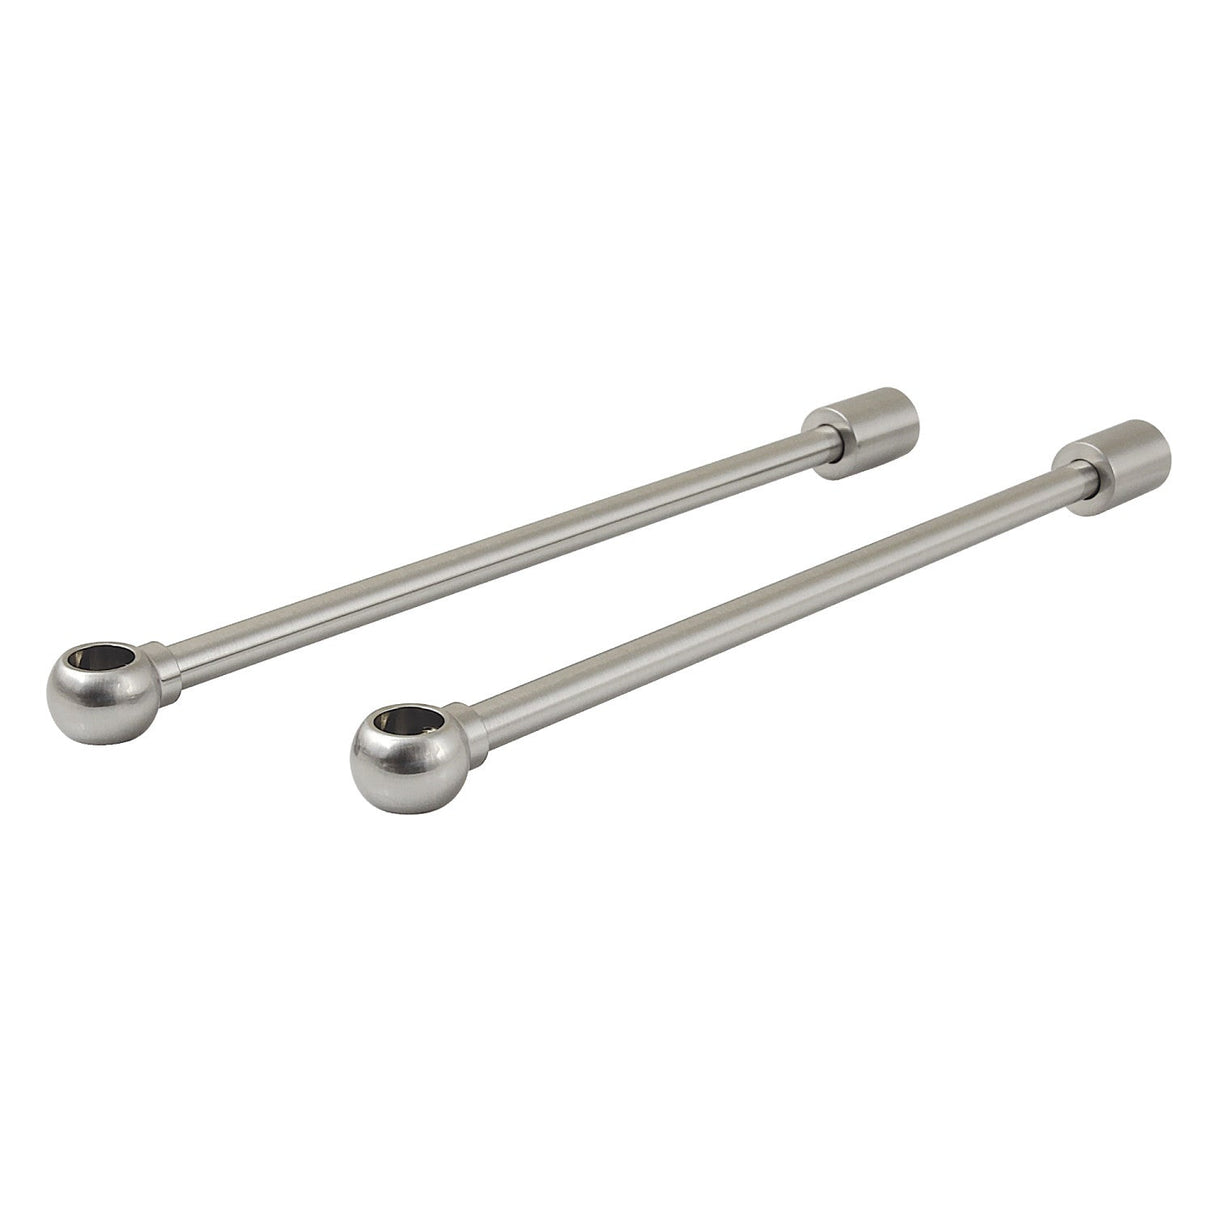 CC418 Tub Supply Line Wall Support for CC46x, CC47x, CC48x, Brushed Nickel